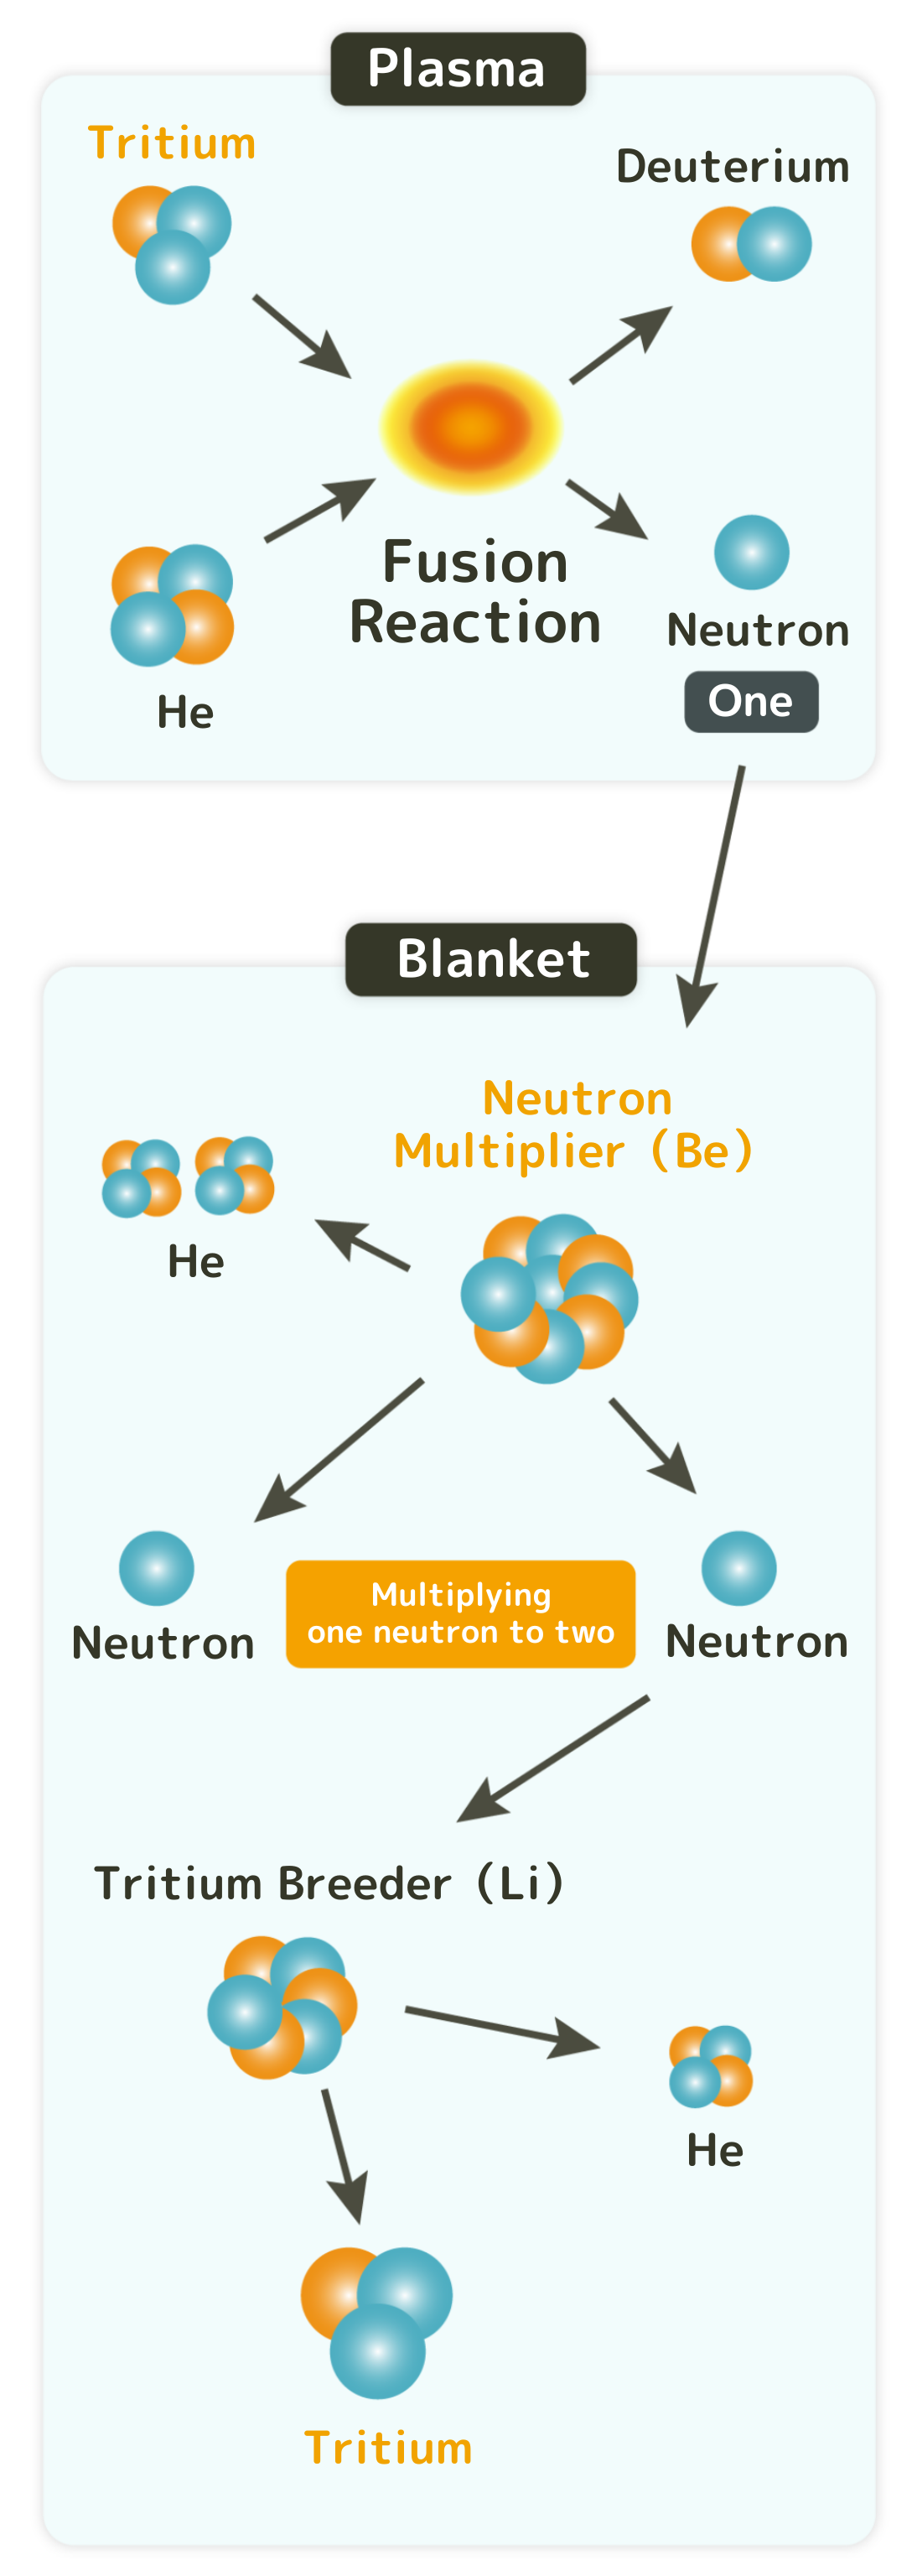 Fusion reactions are caused by ultrafast collisions of deuterium and tritium in plasma. However, tritium is rarely found naturally thus it have to be self-generated in the blanket.<br />
This requires beryllium (neutron multiplier), which doubles the number of neutrons to two.